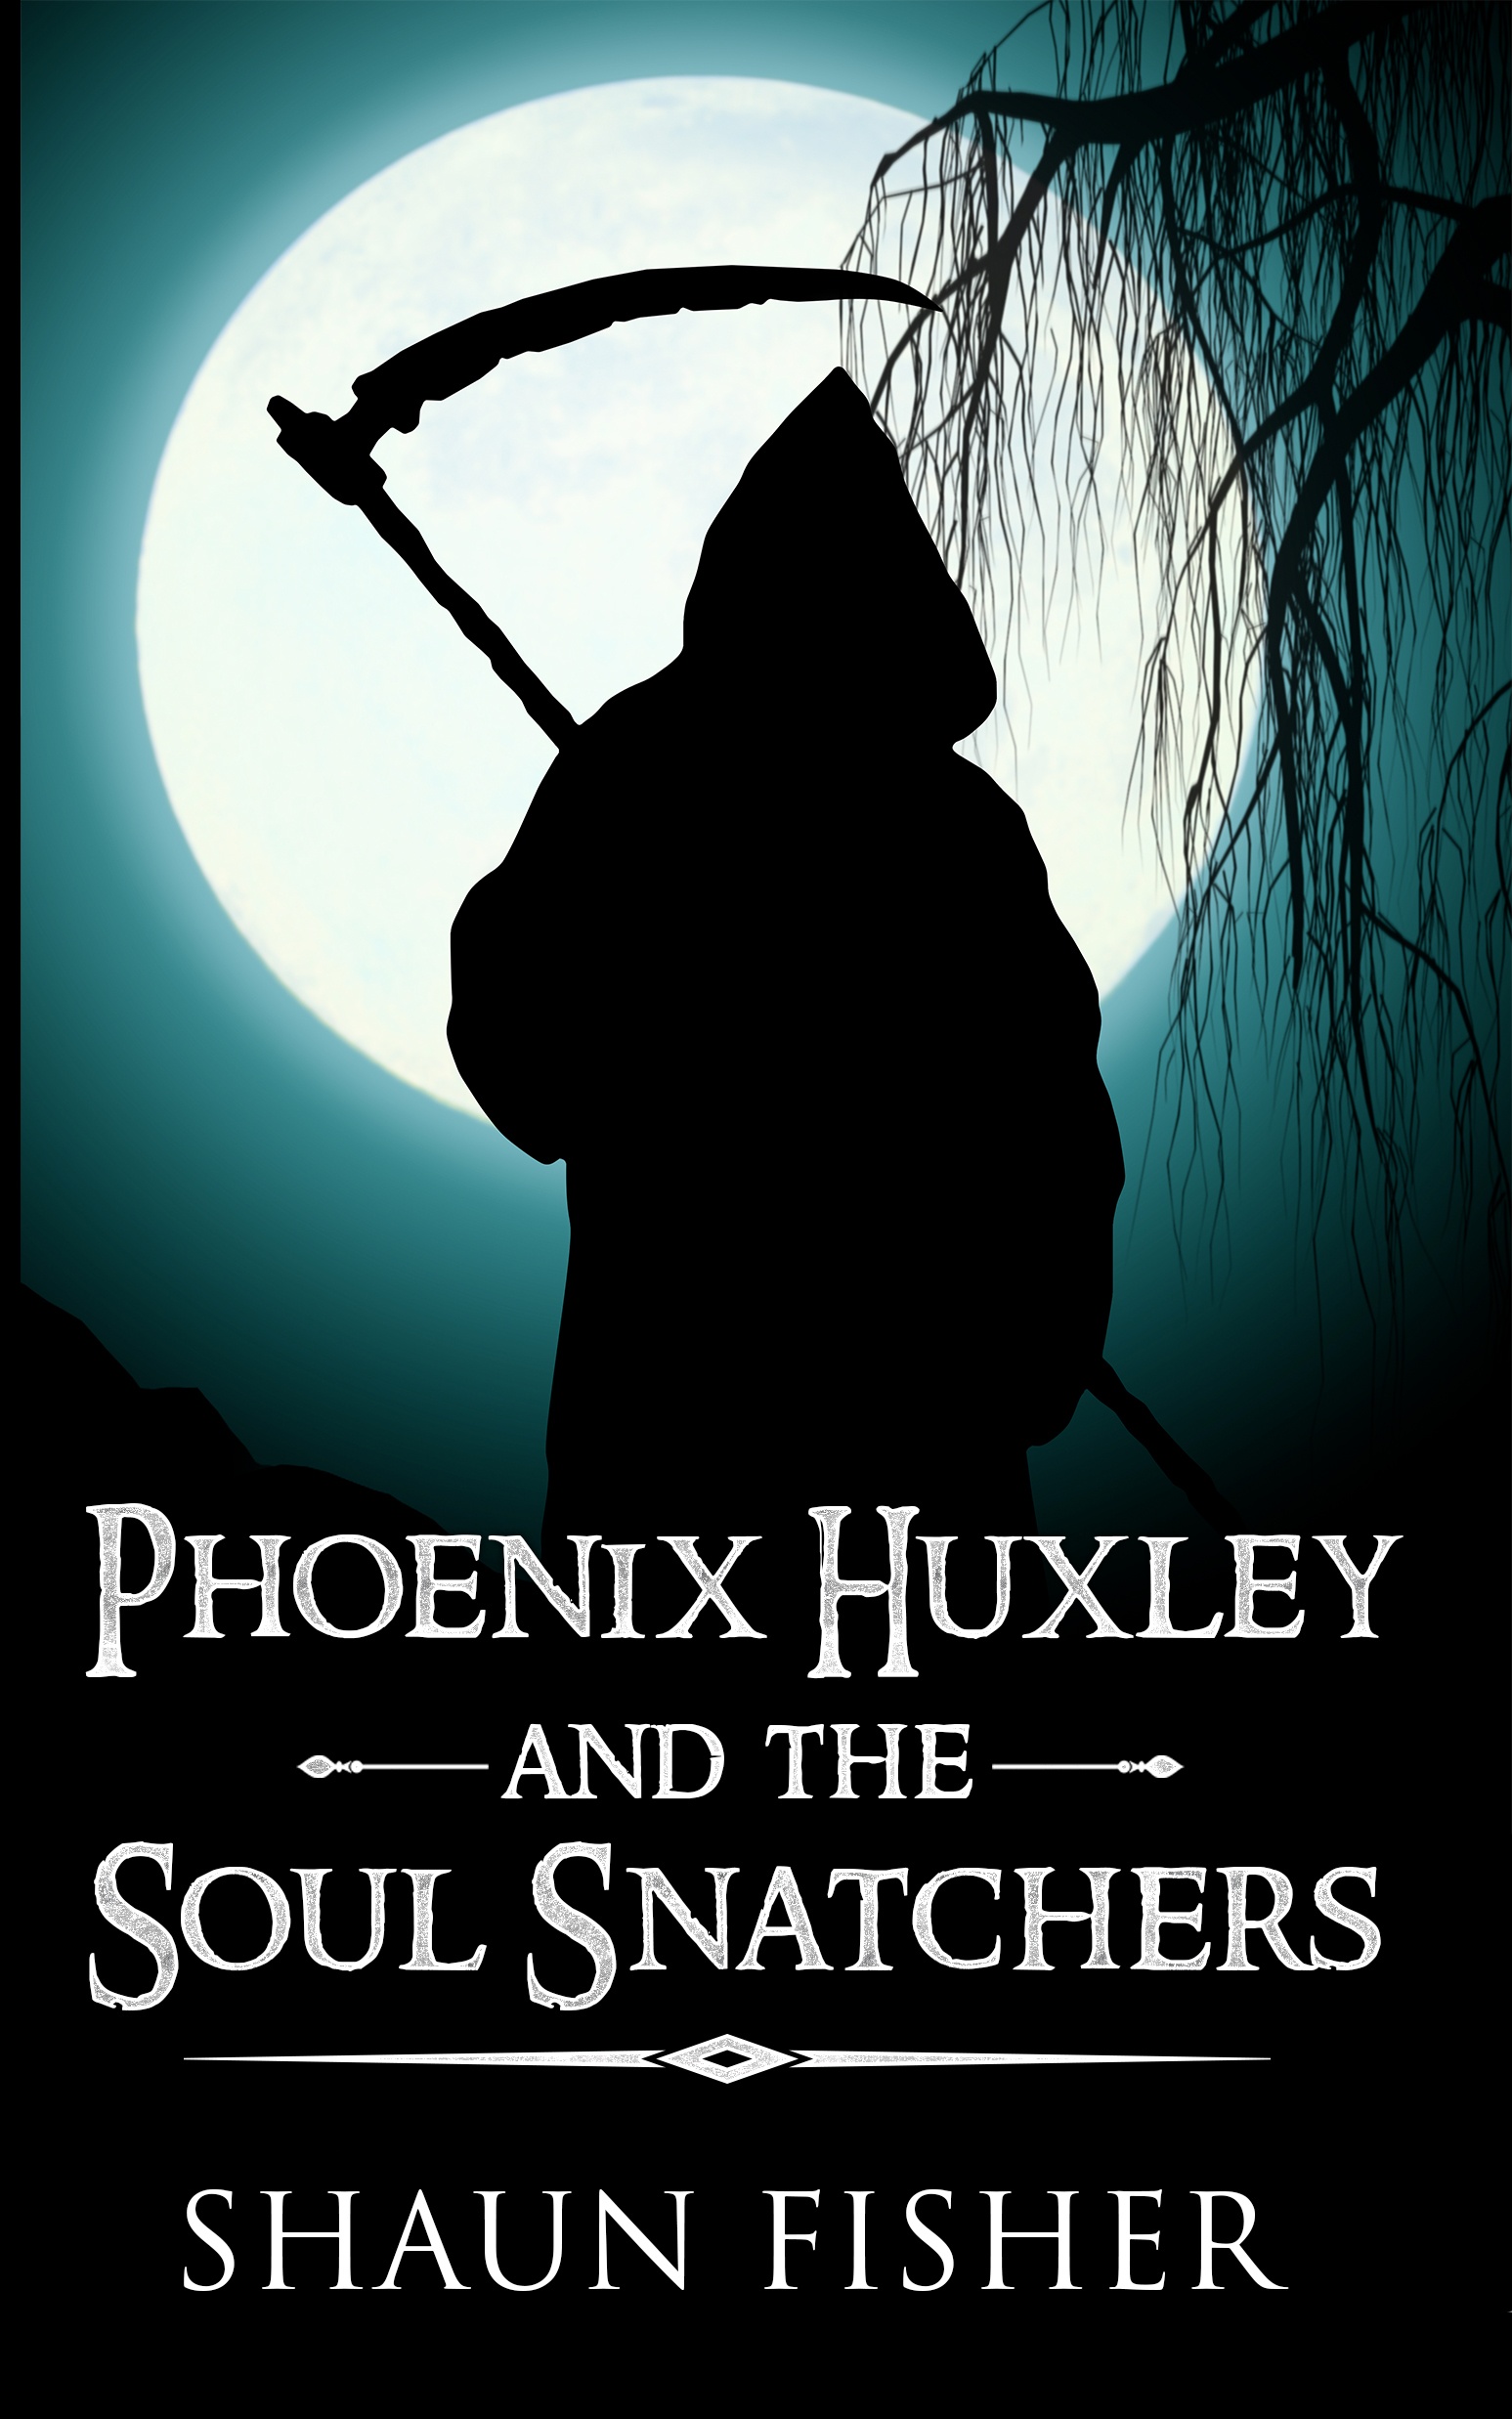 FREE: Phoenix Huxley and the Soul Snatchers by Shaun Fisher